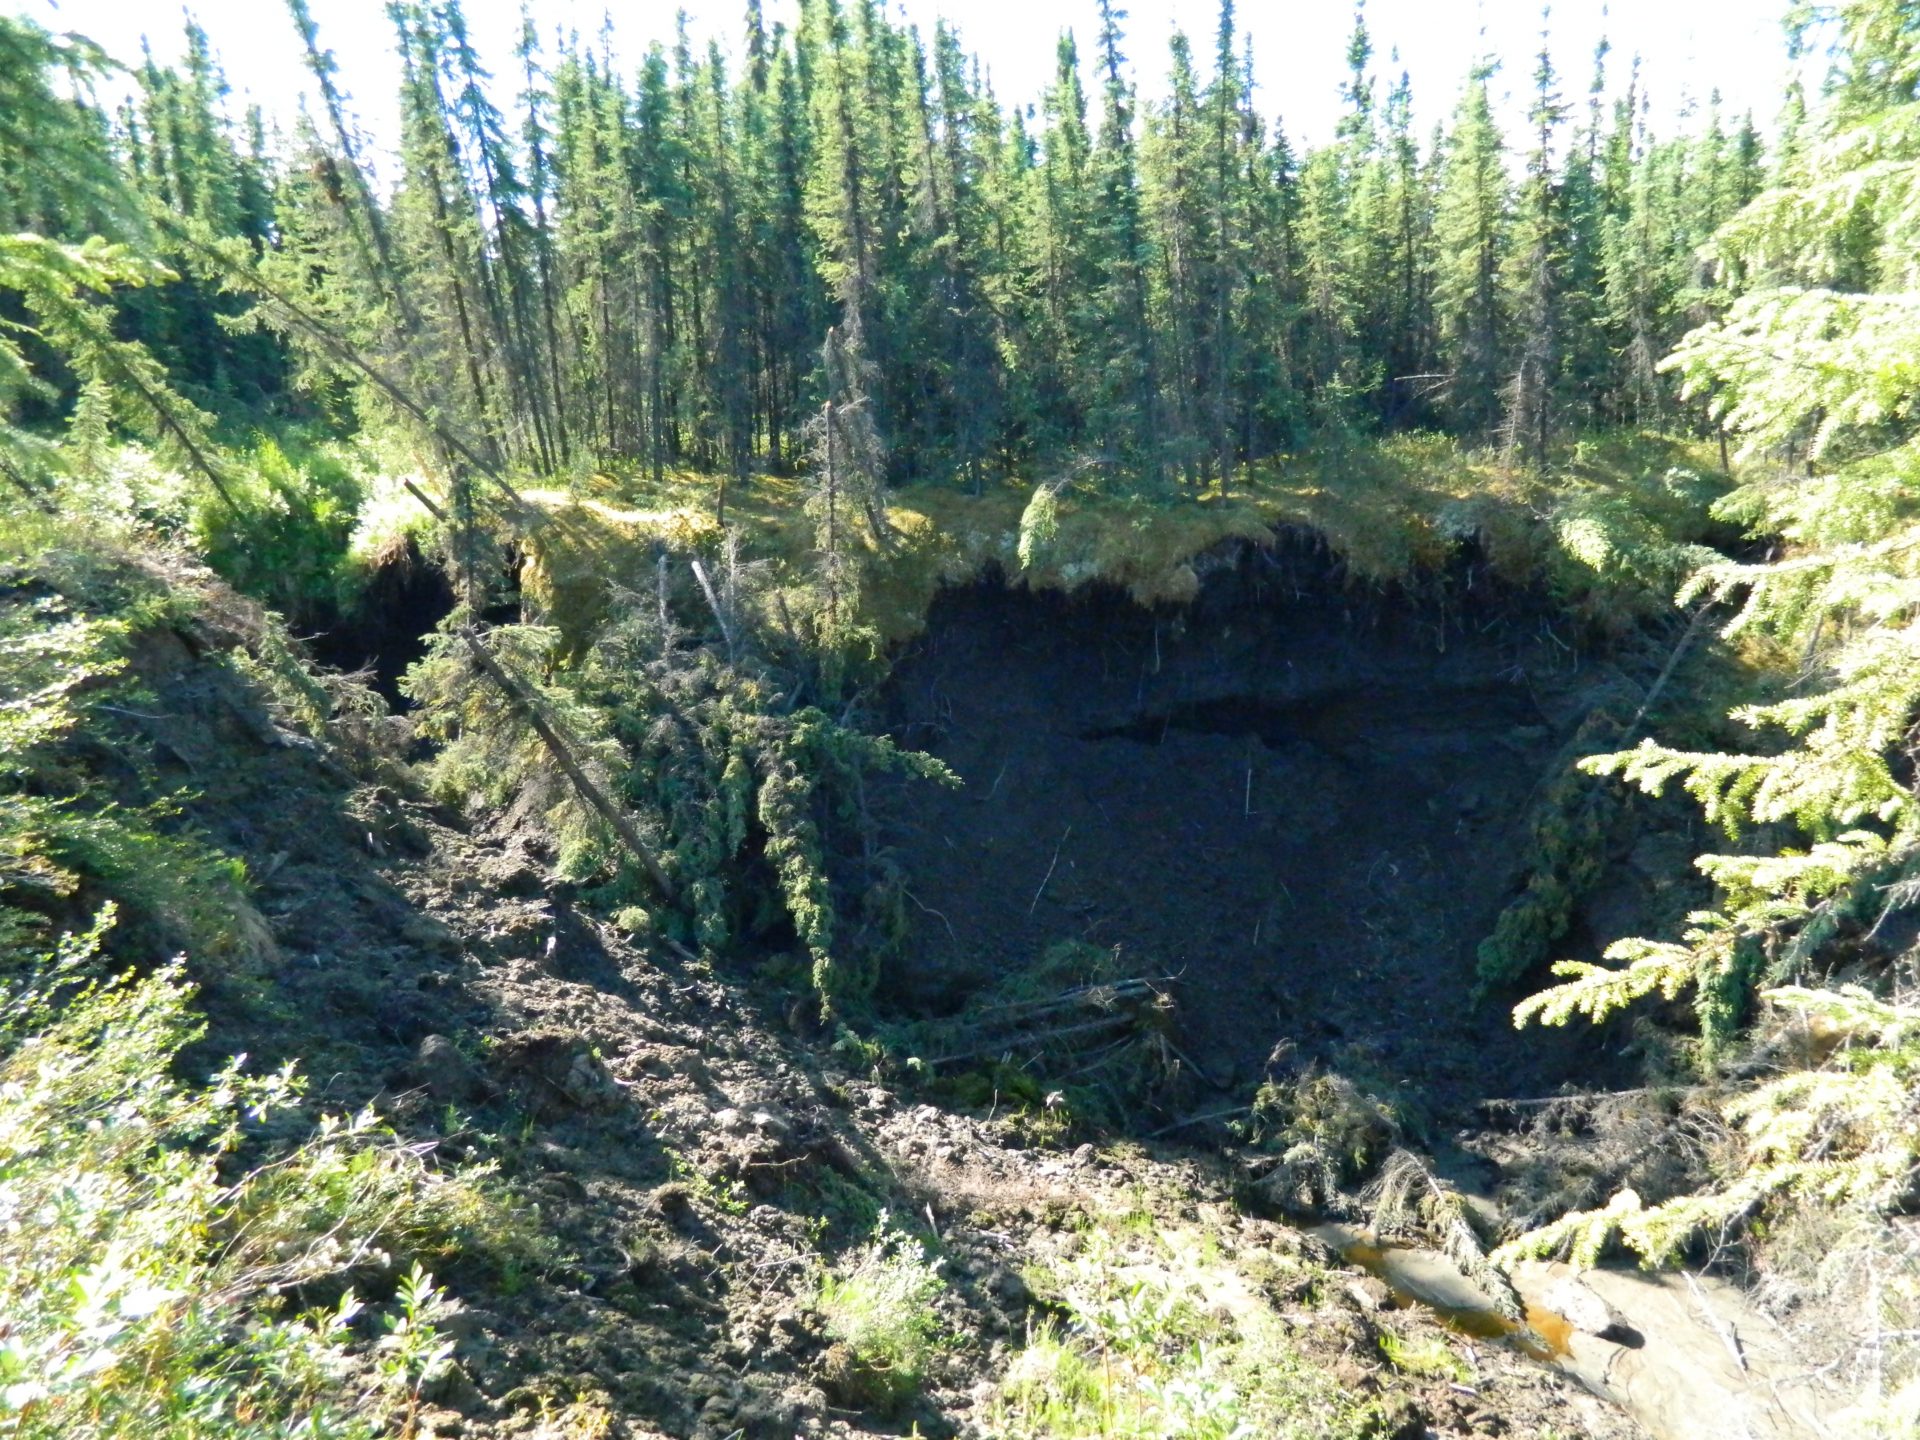 Jeff Pederson noticed a sink hole forming just north of Fairbanks, Alaska.